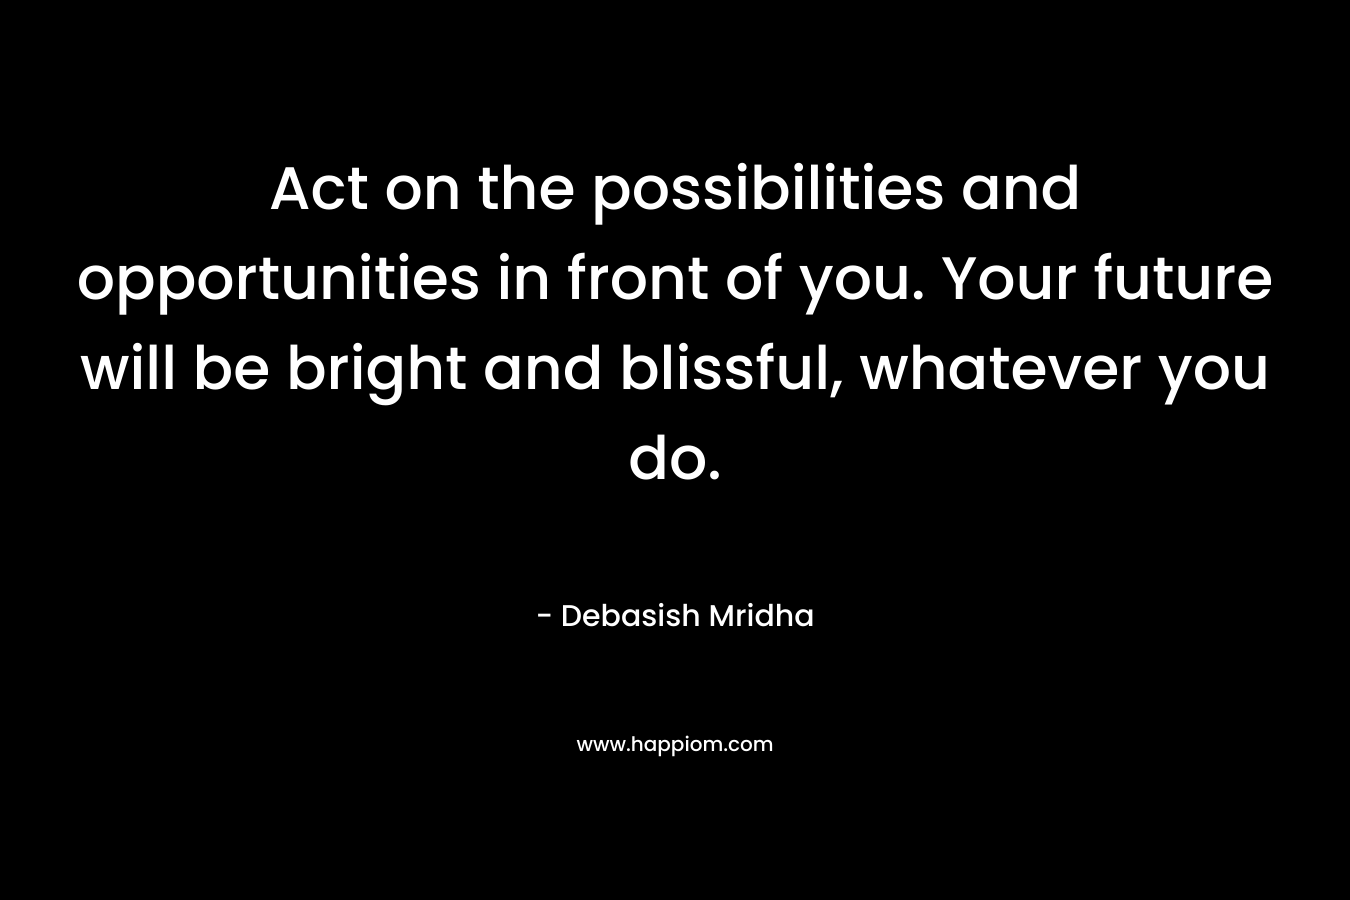 Act on the possibilities and opportunities in front of you. Your future will be bright and blissful, whatever you do.